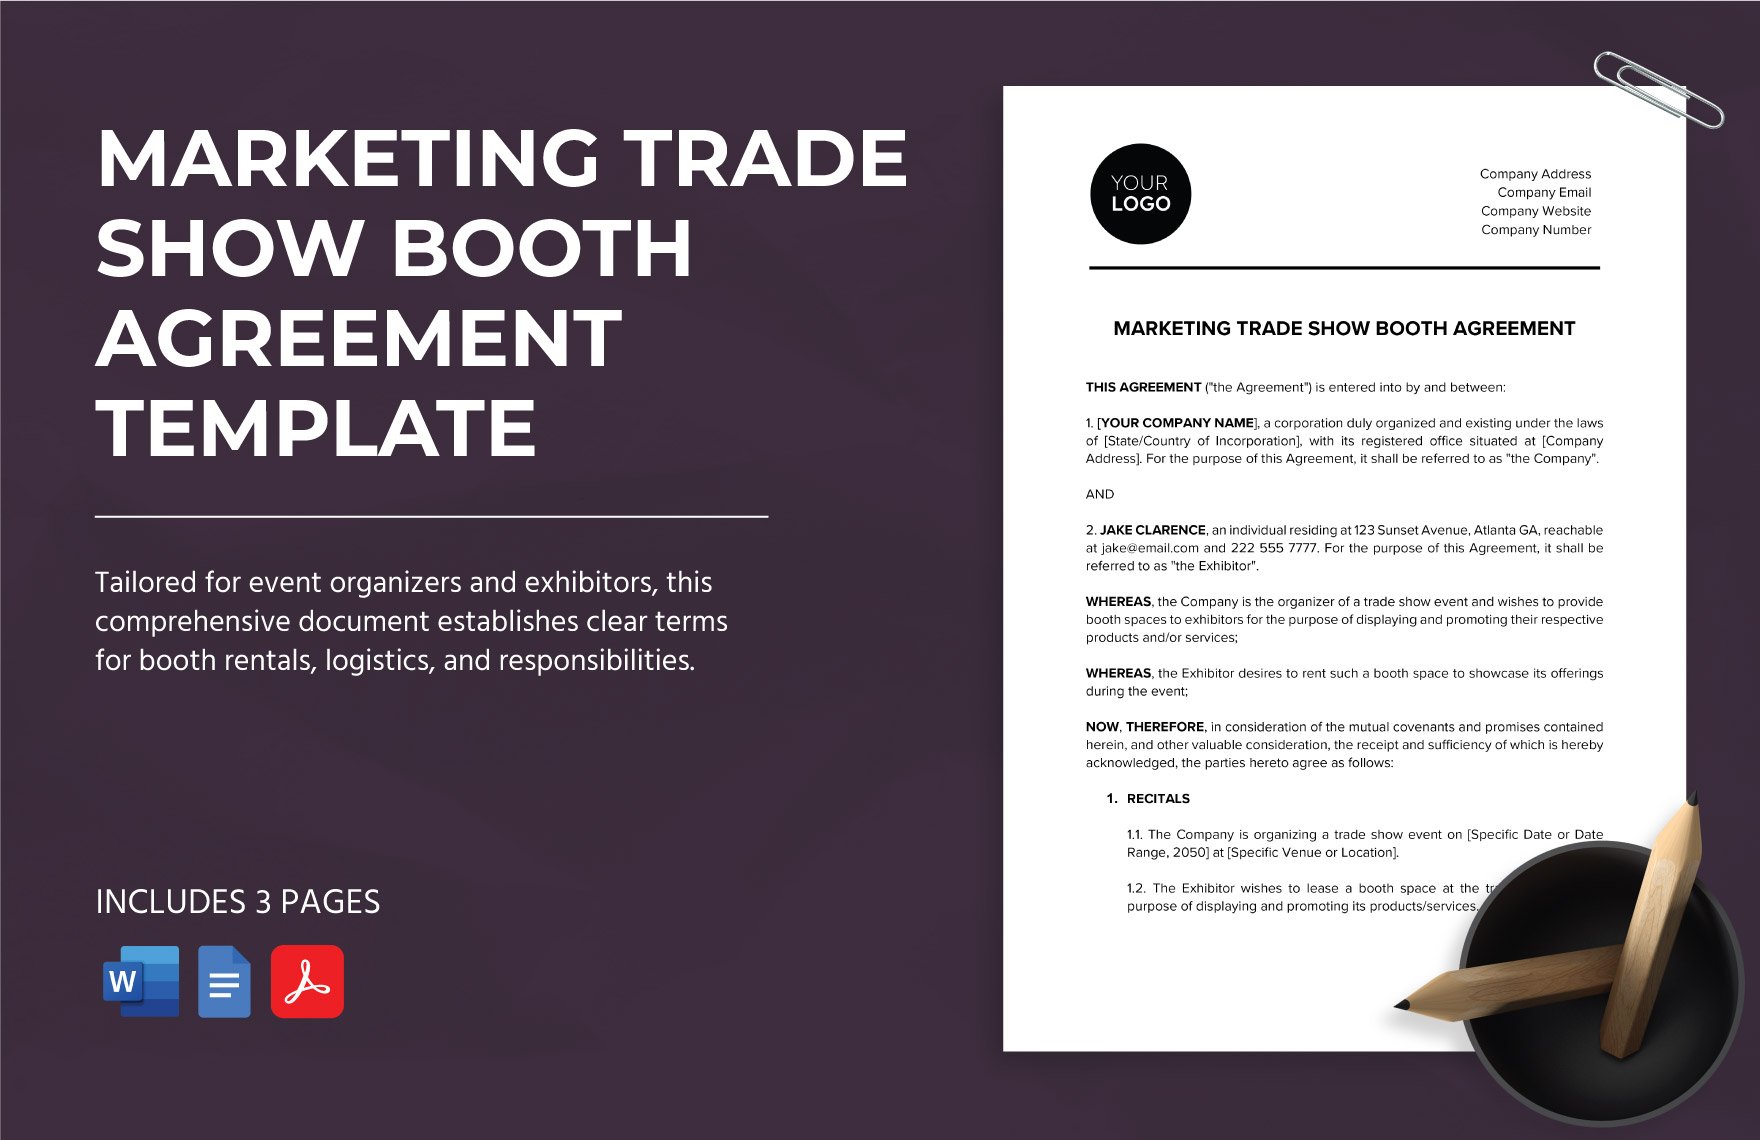 Marketing Trade Show Booth Agreement Template in Word, Google Docs, PDF